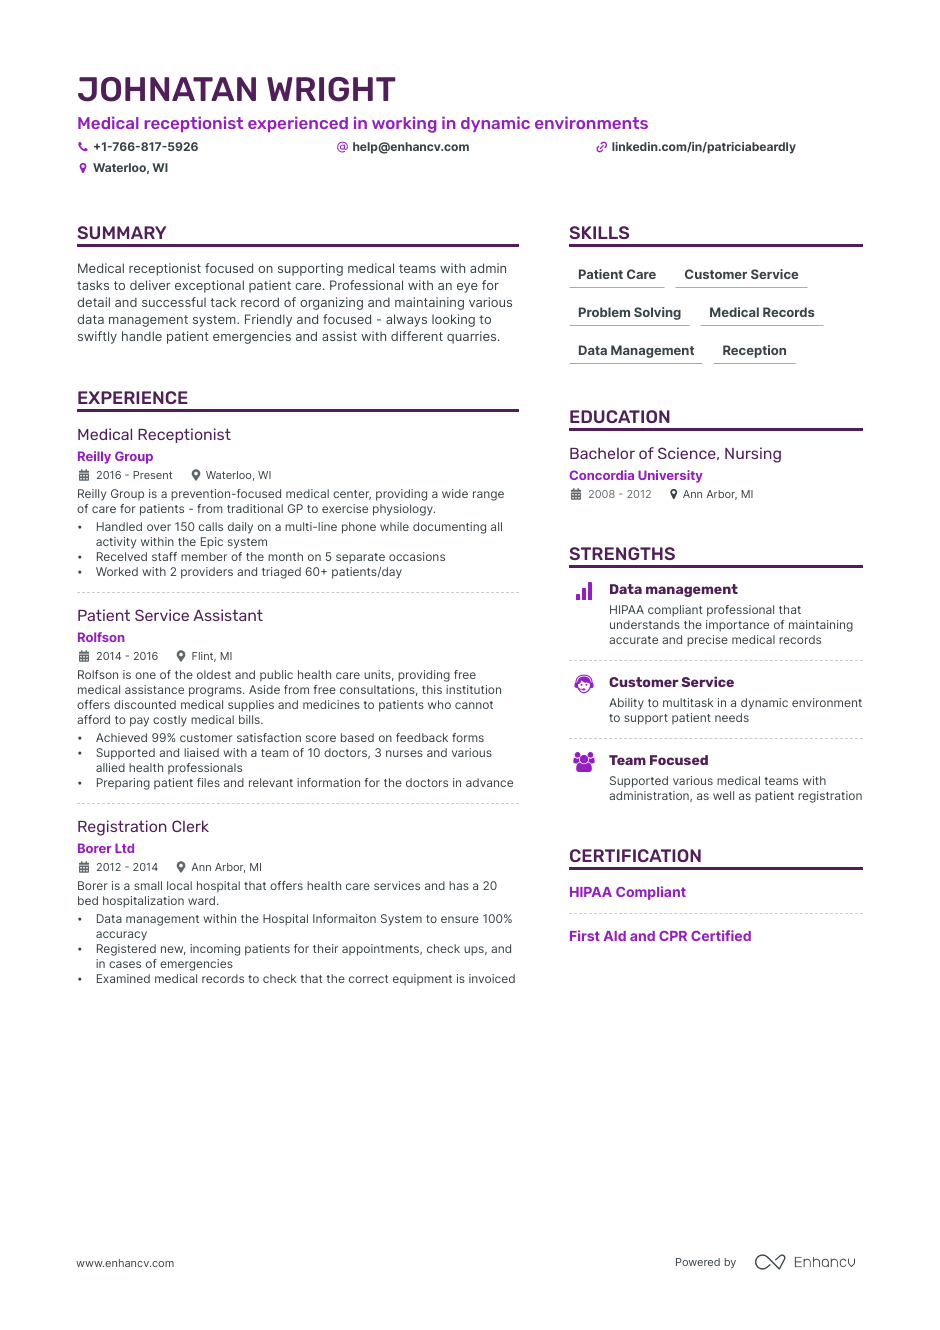 Medical Receptionist resume example